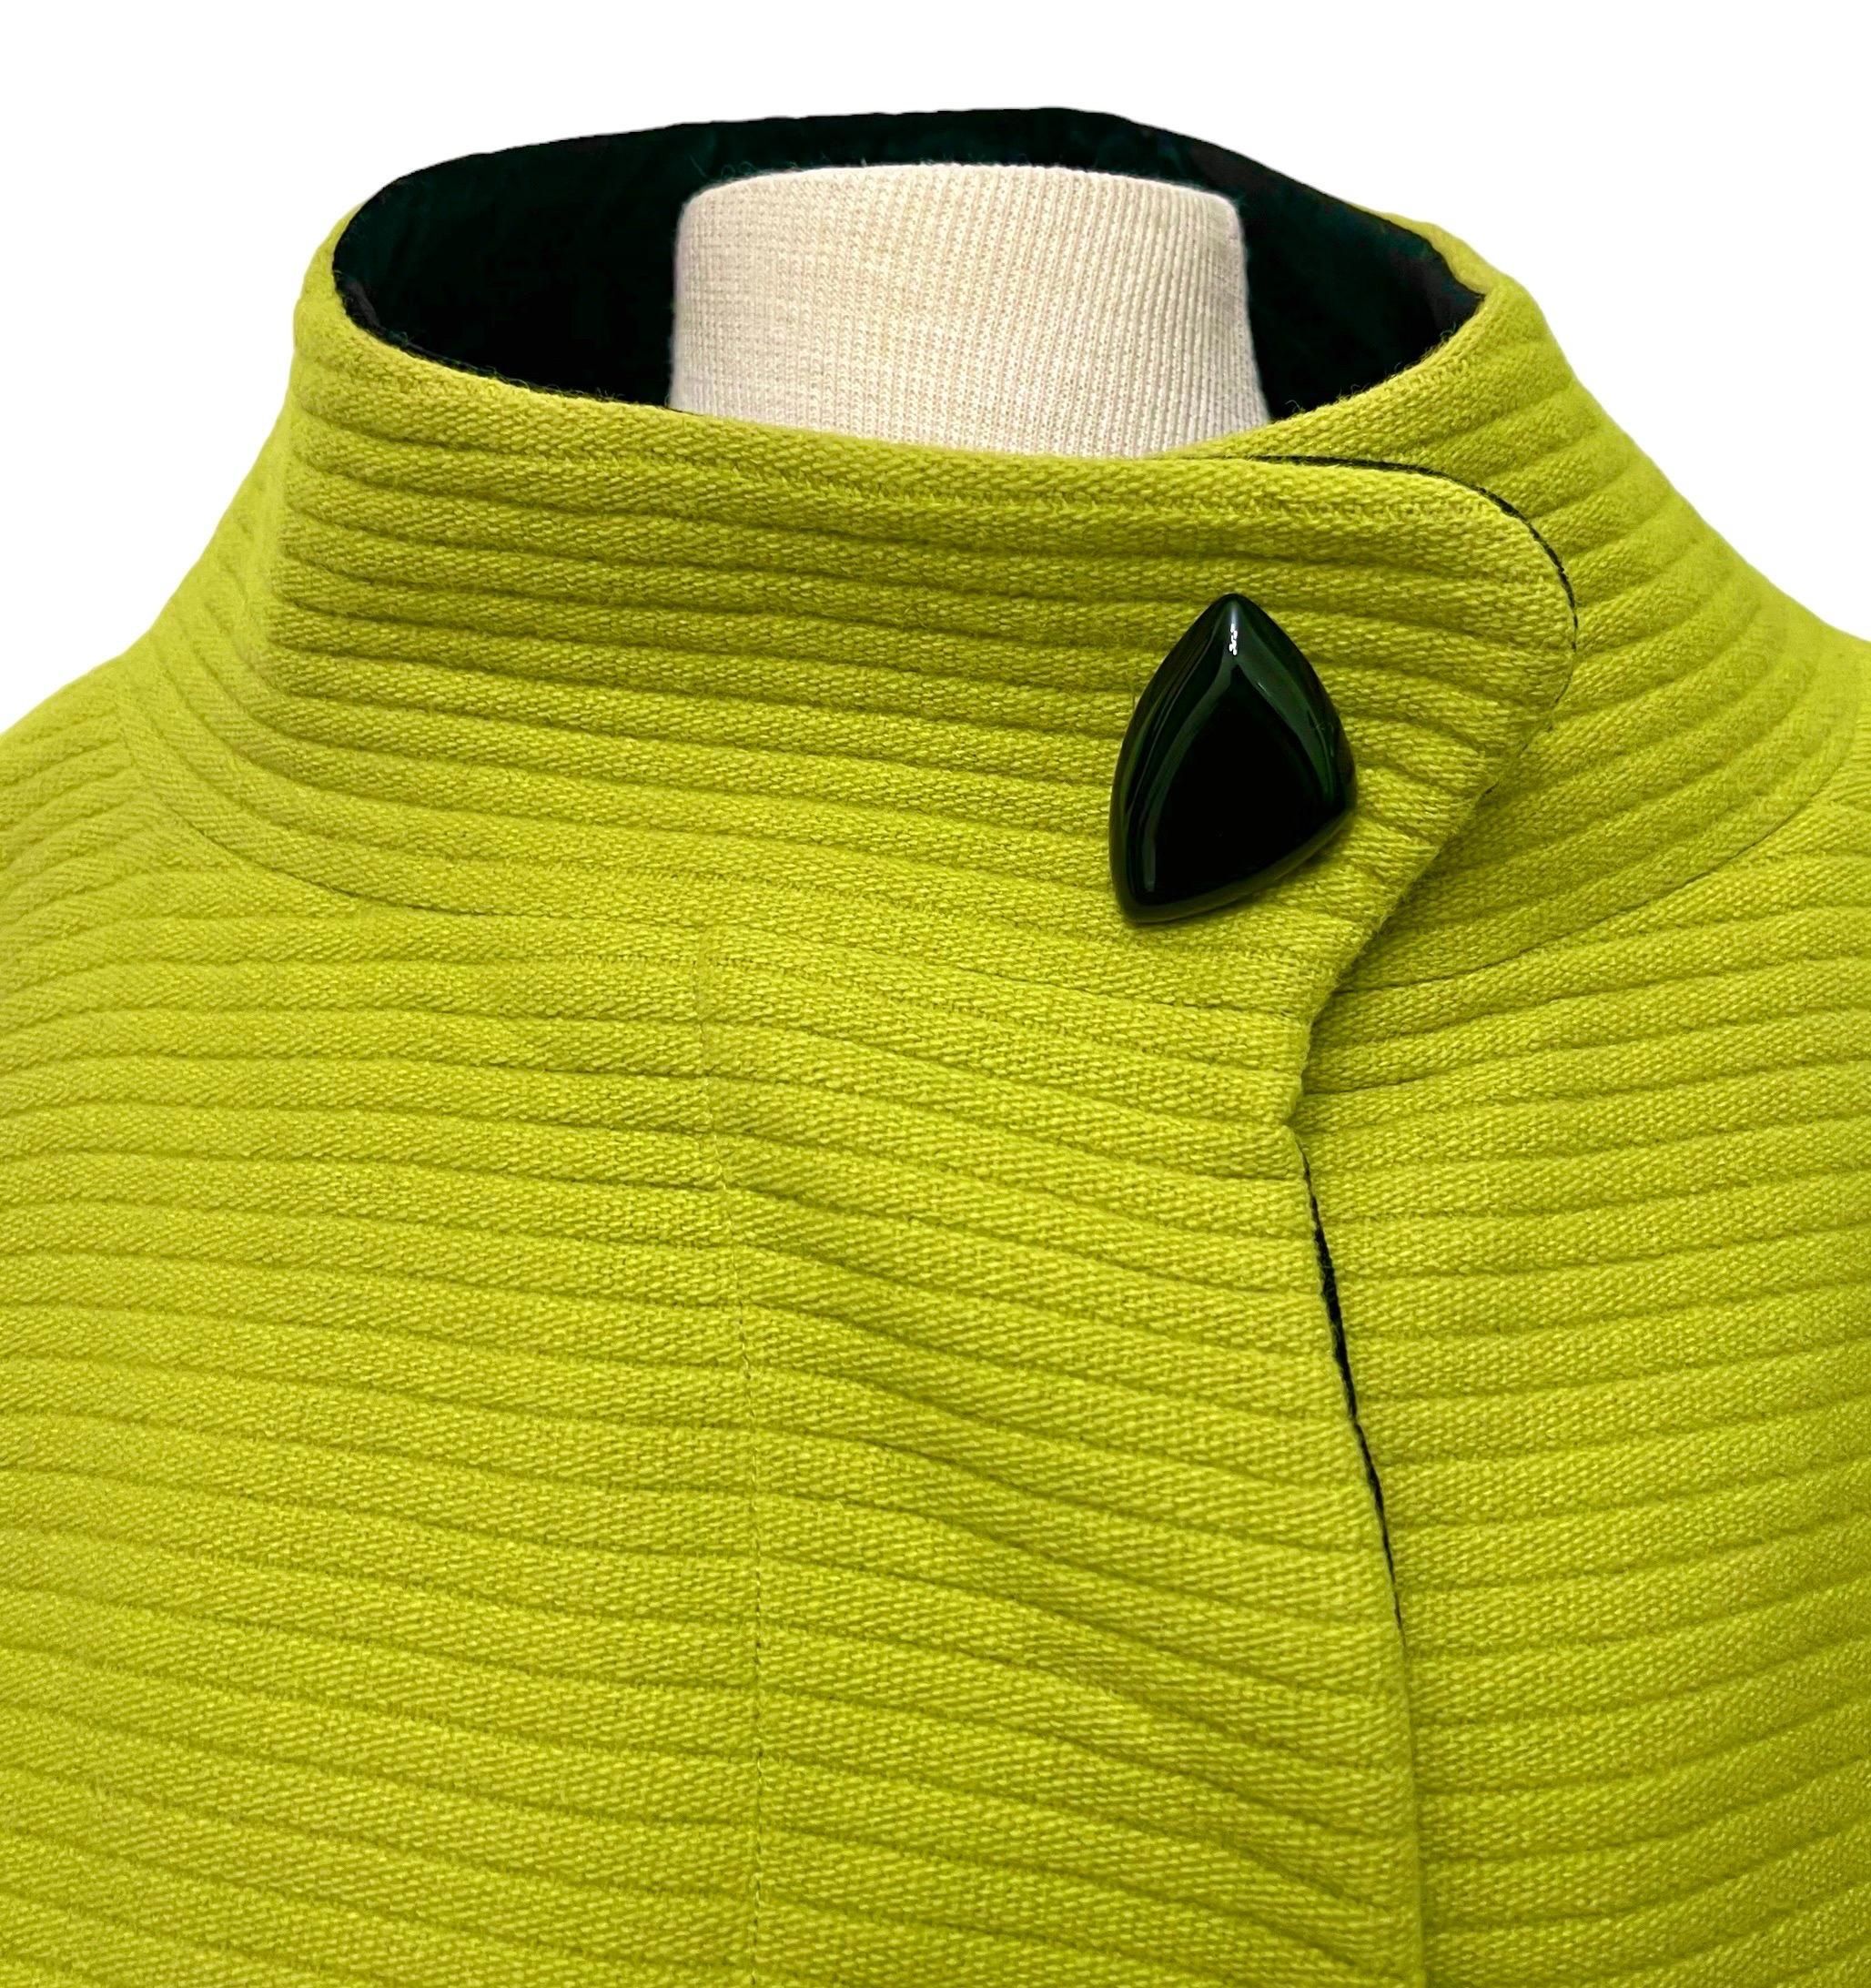 F/W 1990 Thierry Mugler Lime Green Futuristic Cocoon Coat For Sale 3